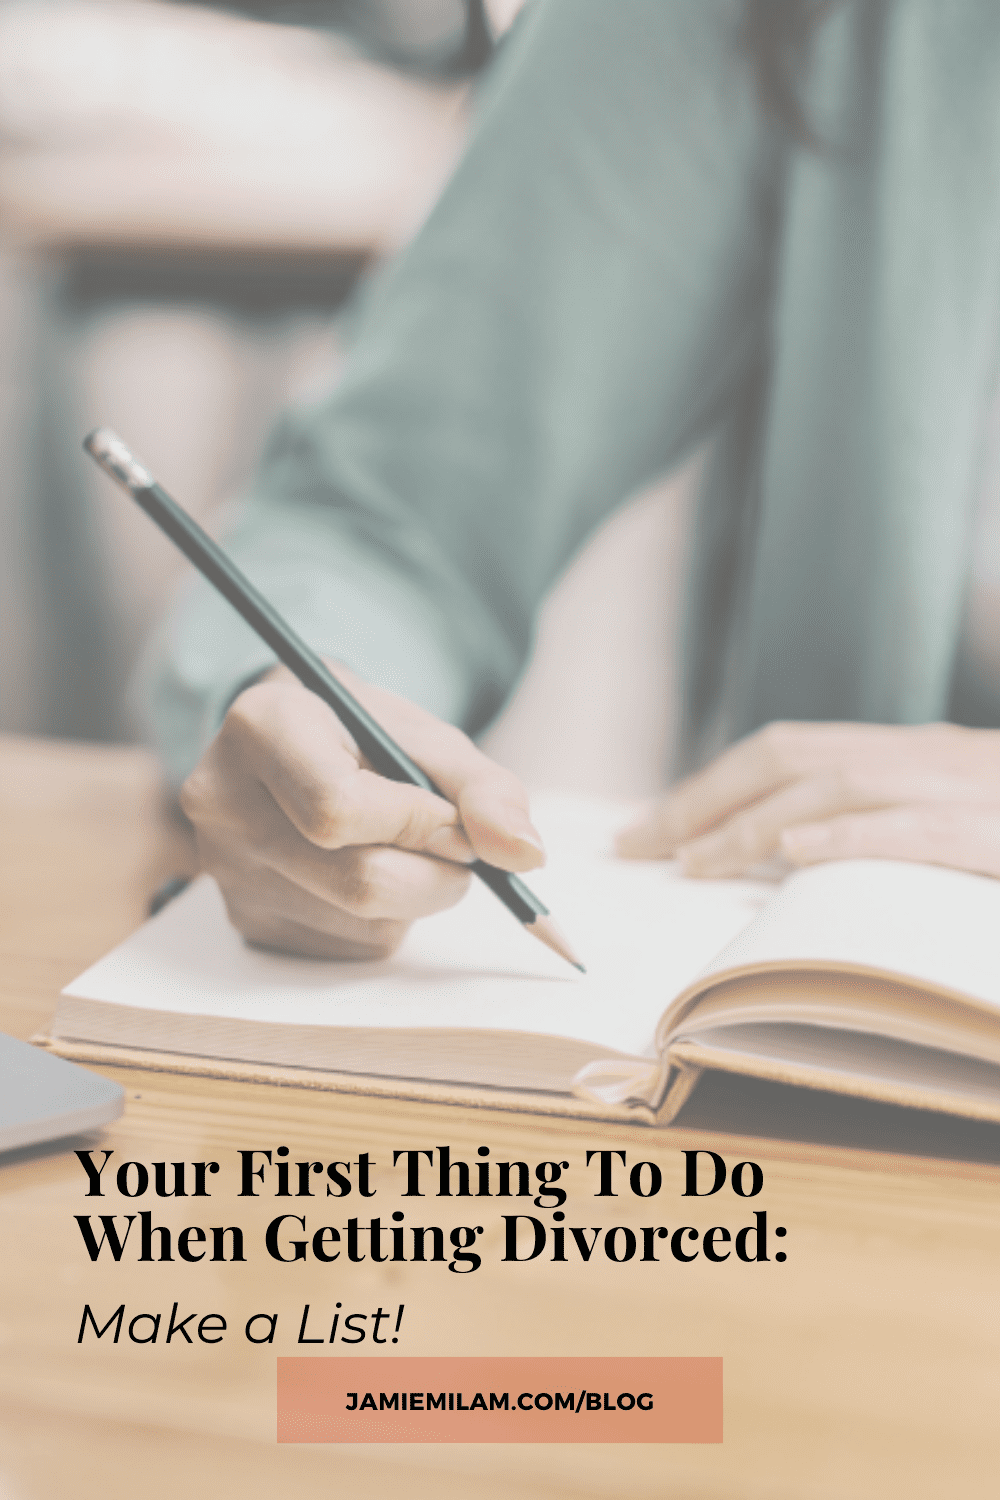 Image of a woman writing in a notebook and the text "Your First Thing To Do When Getting Divorced: Make a List"